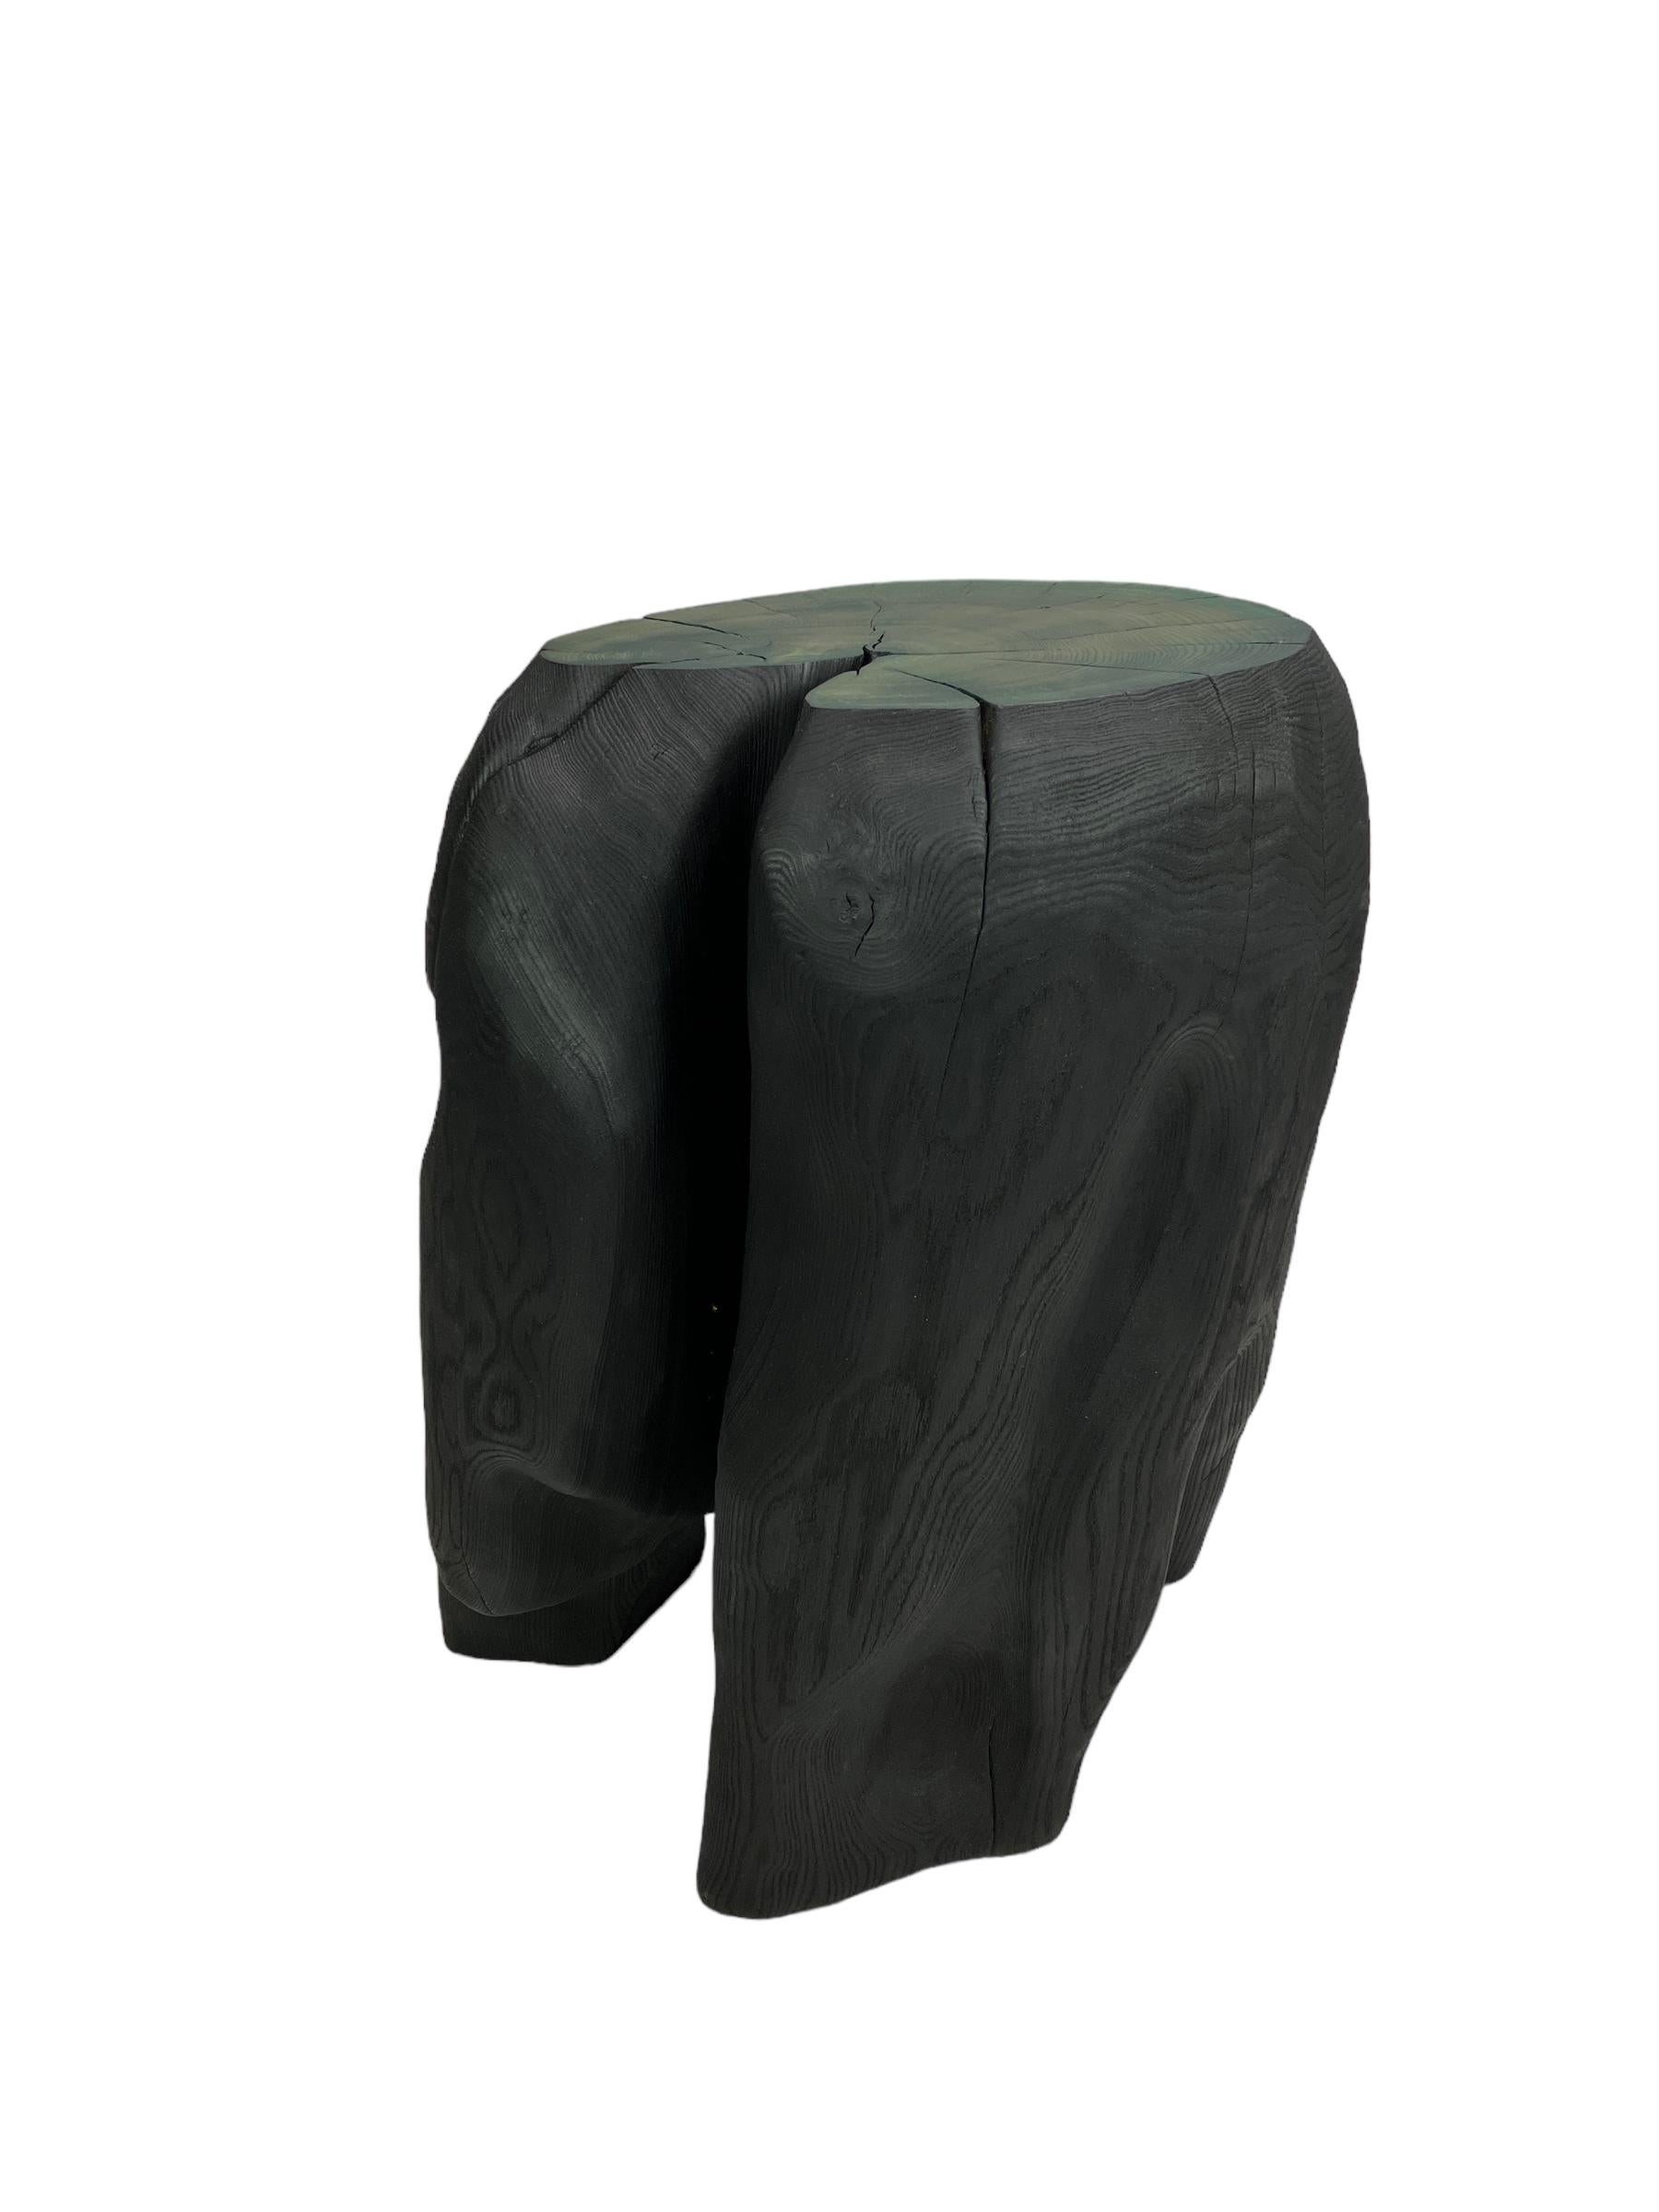 Organic Modern Carved sculptural wooden stool or table 